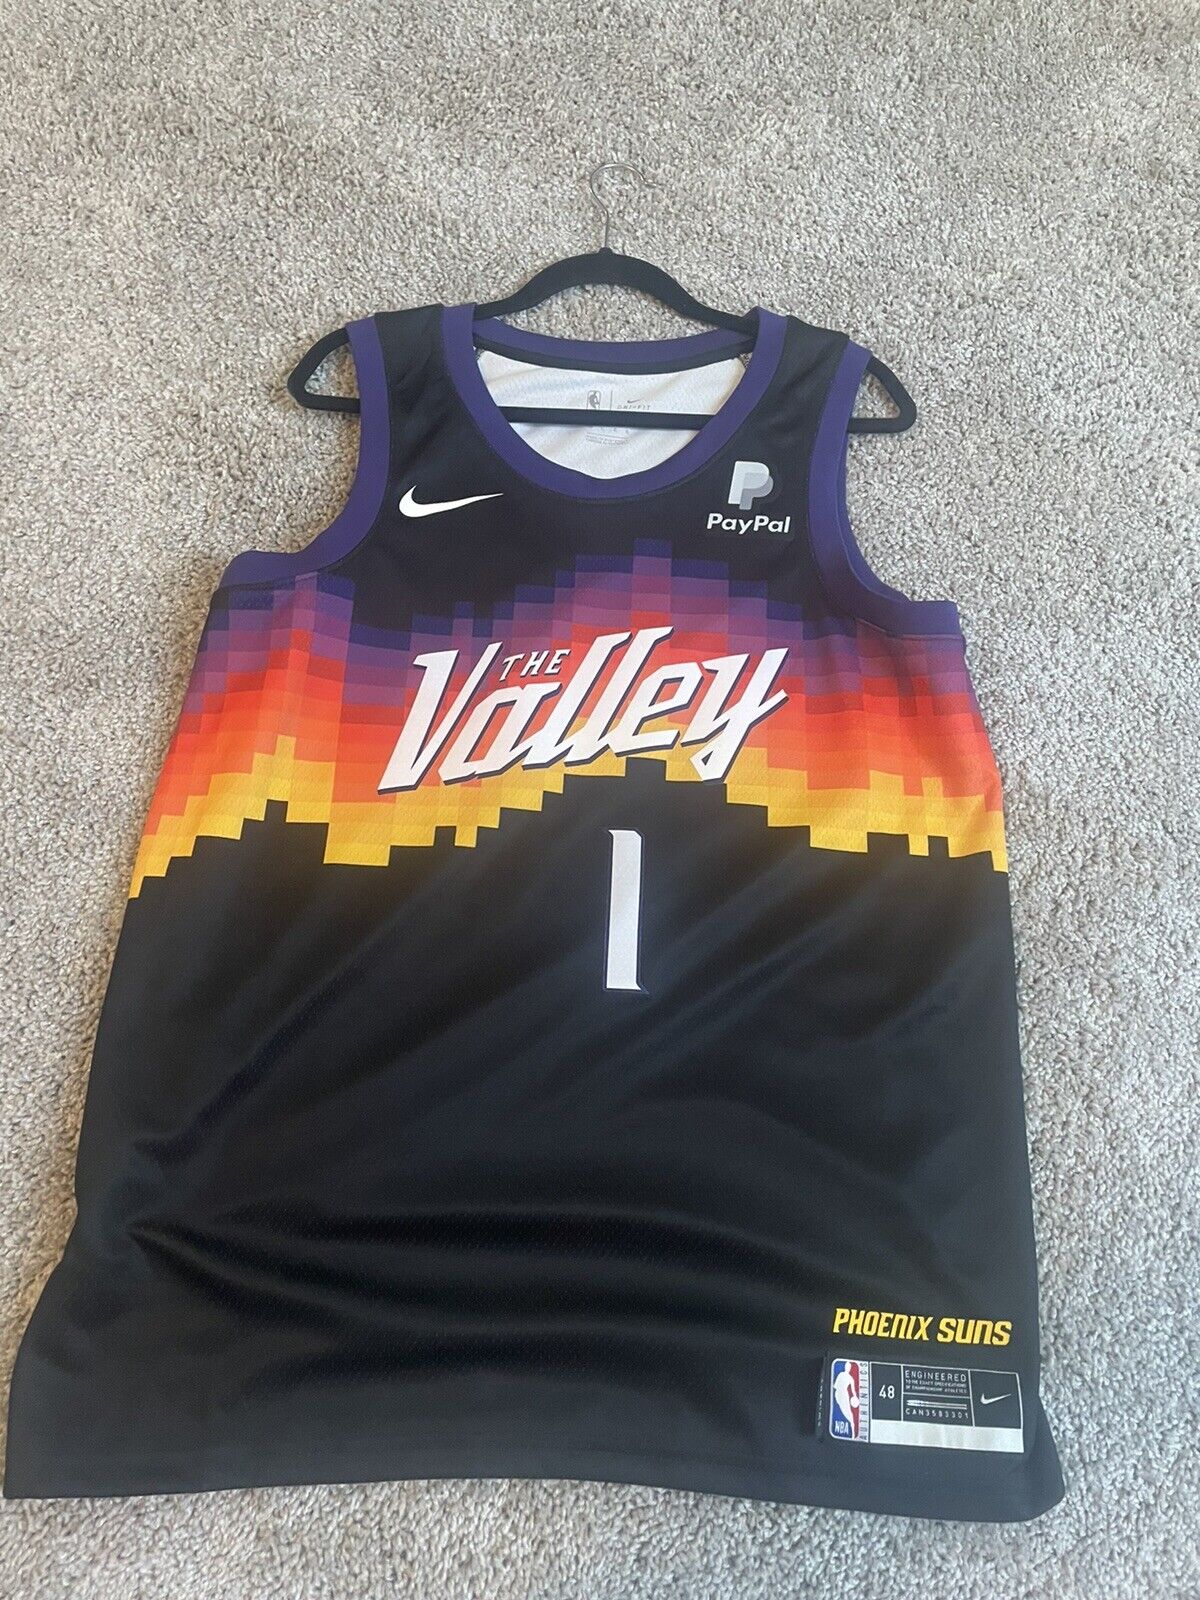 phoenix suns booker valley jersey - OFF-70% > Shipping free